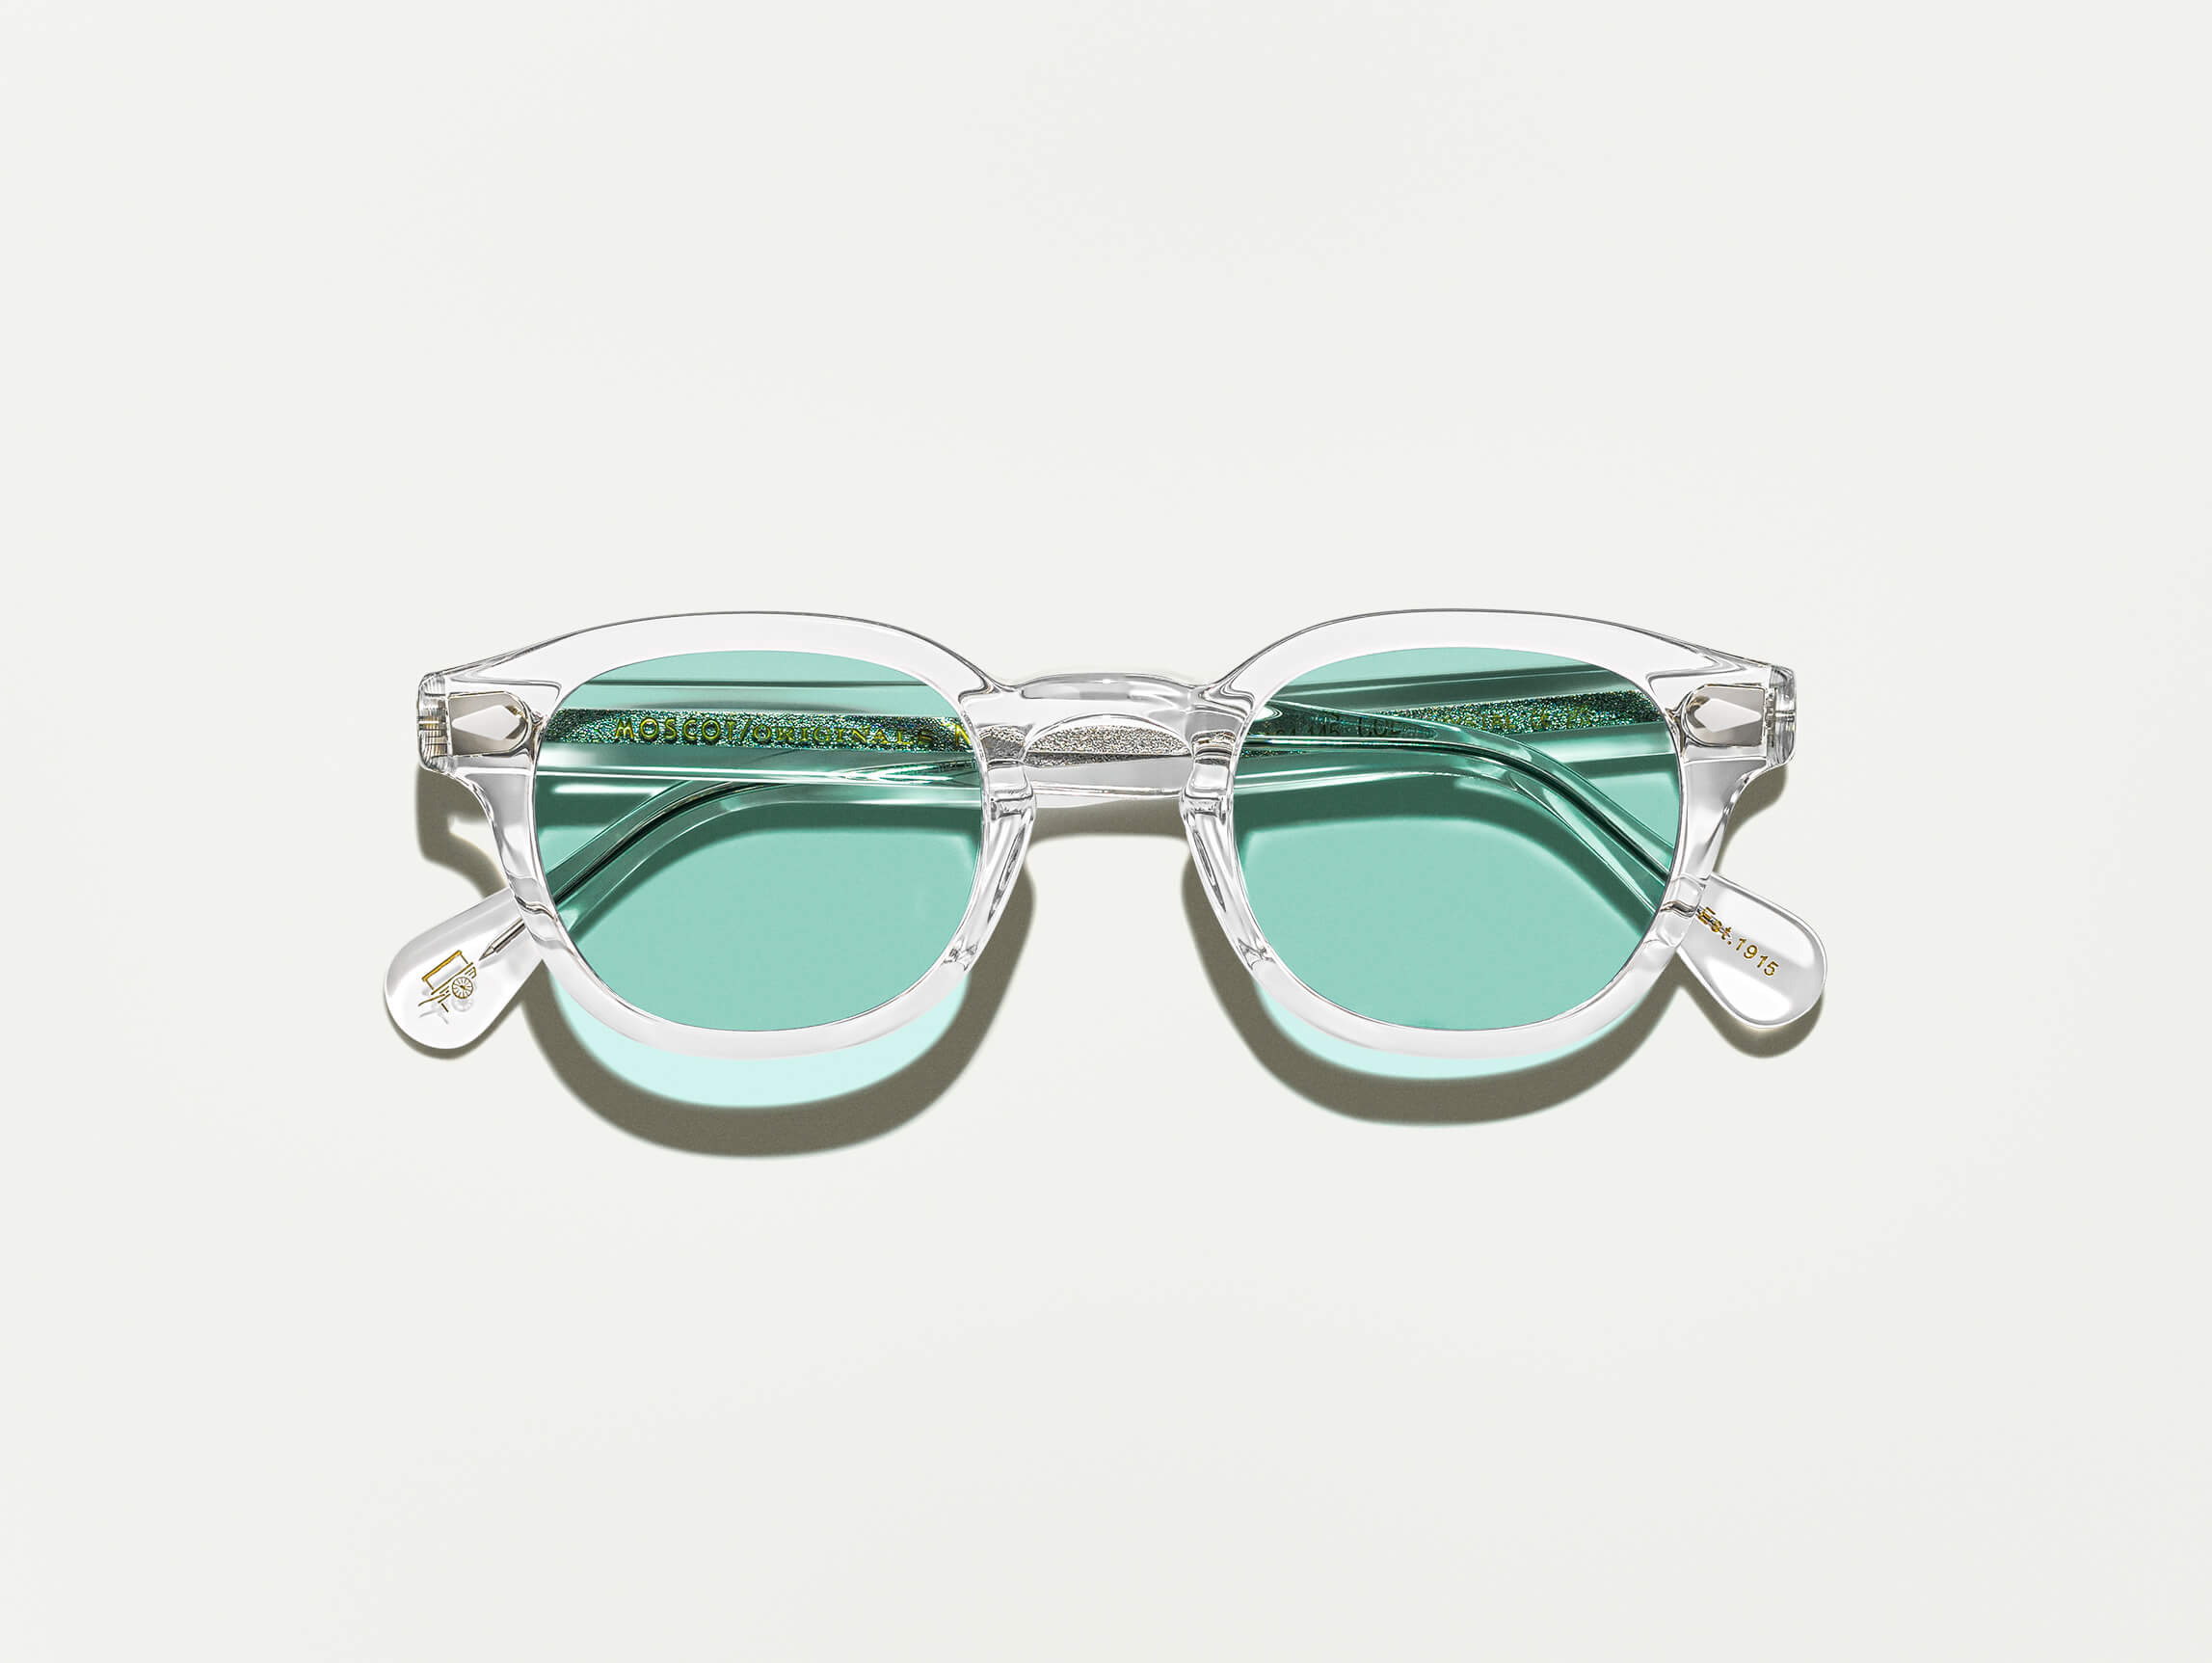 The LEMTOSH Crystal with Turquoise Tinted Lenses